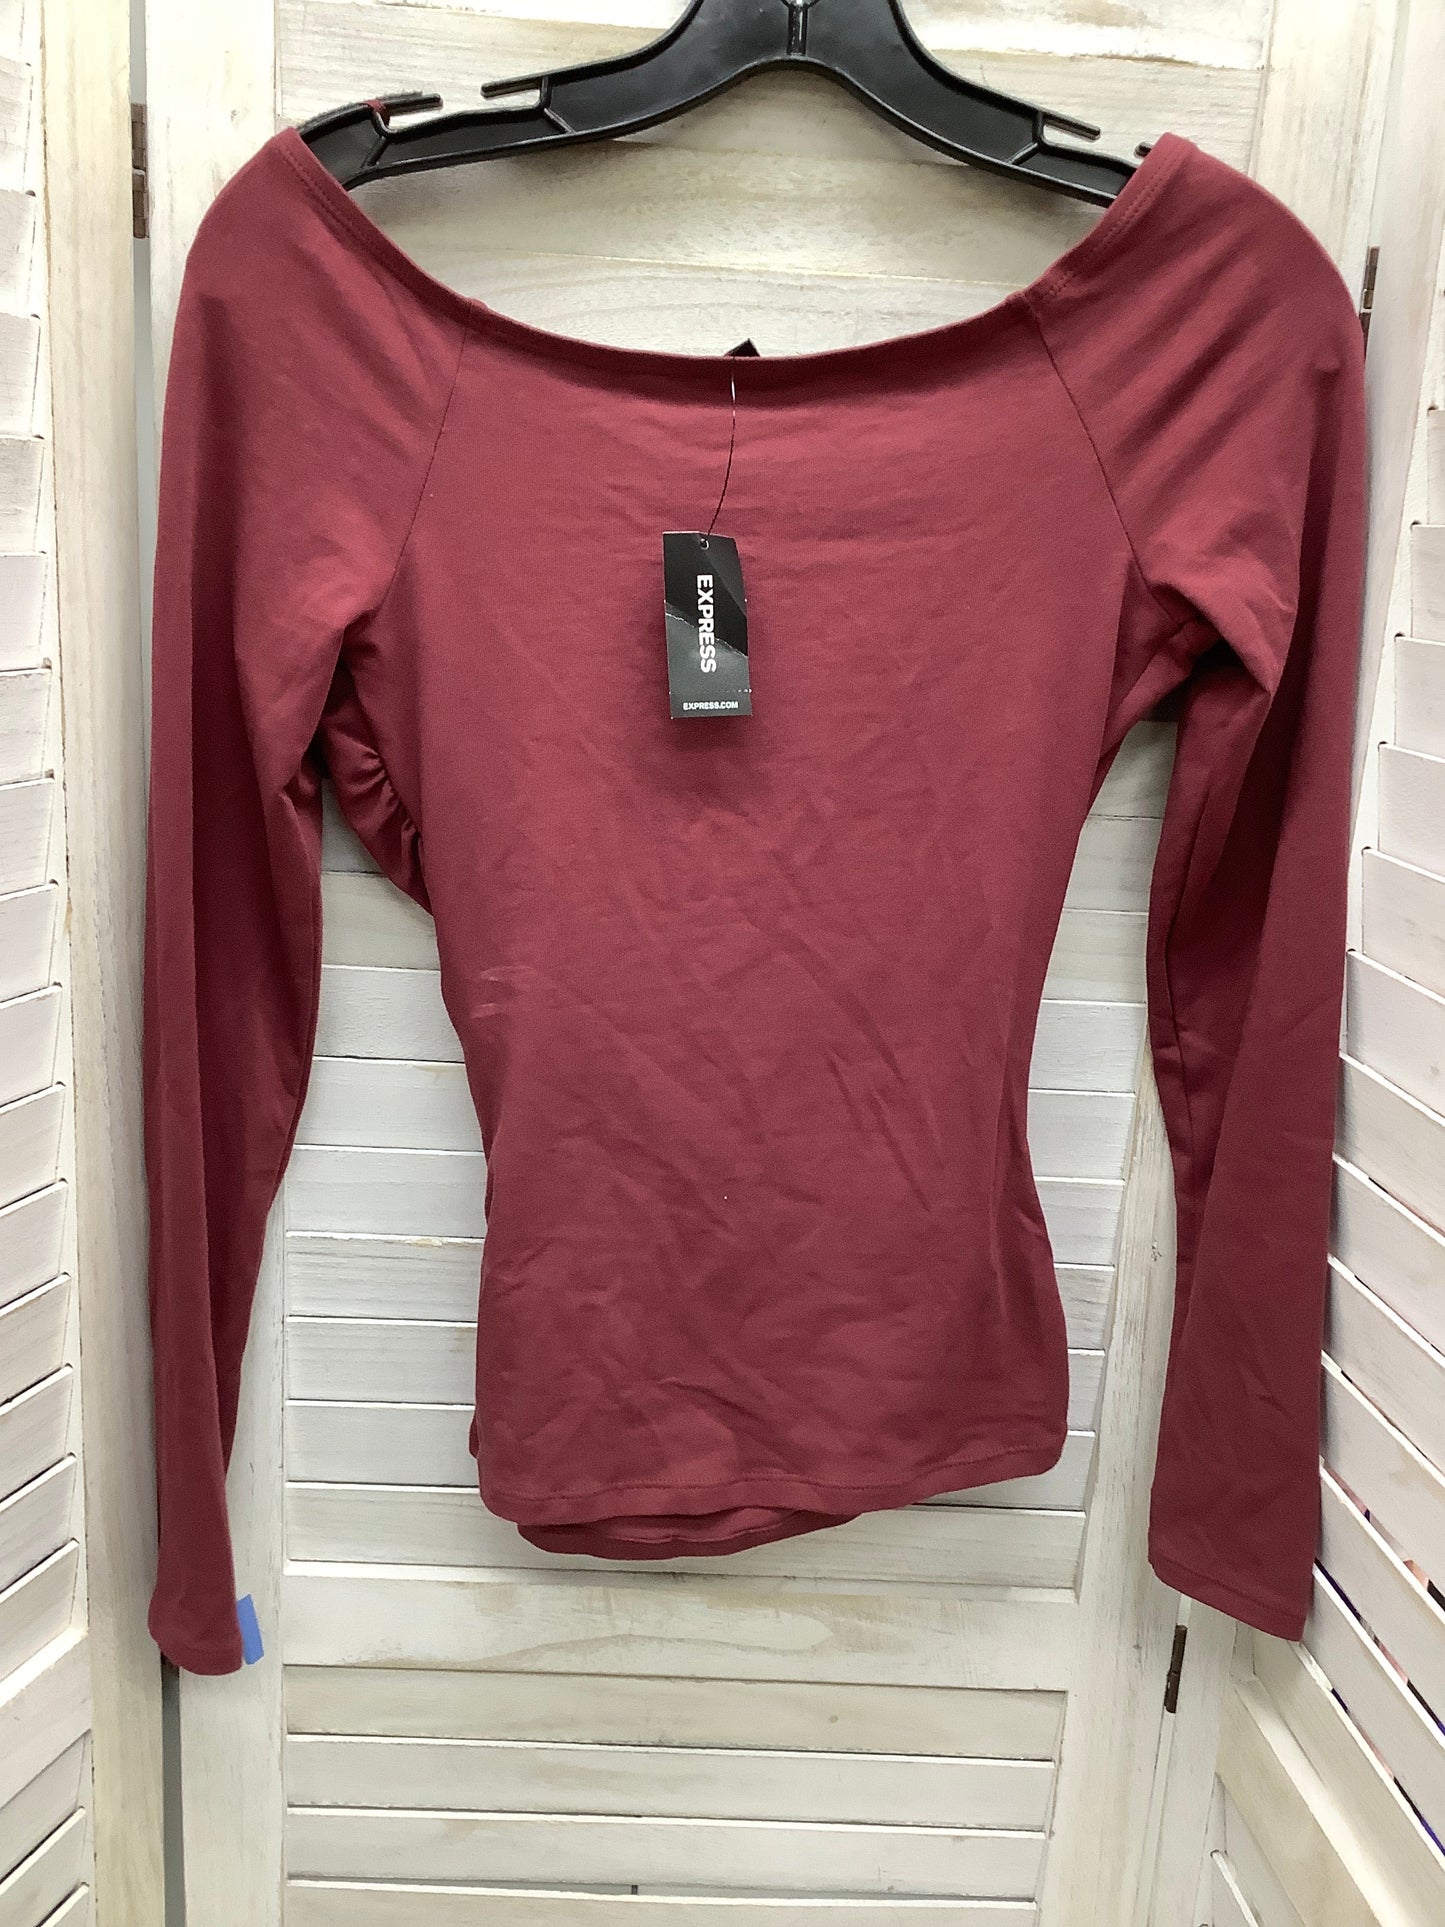 Blush Top Long Sleeve Express, Size S